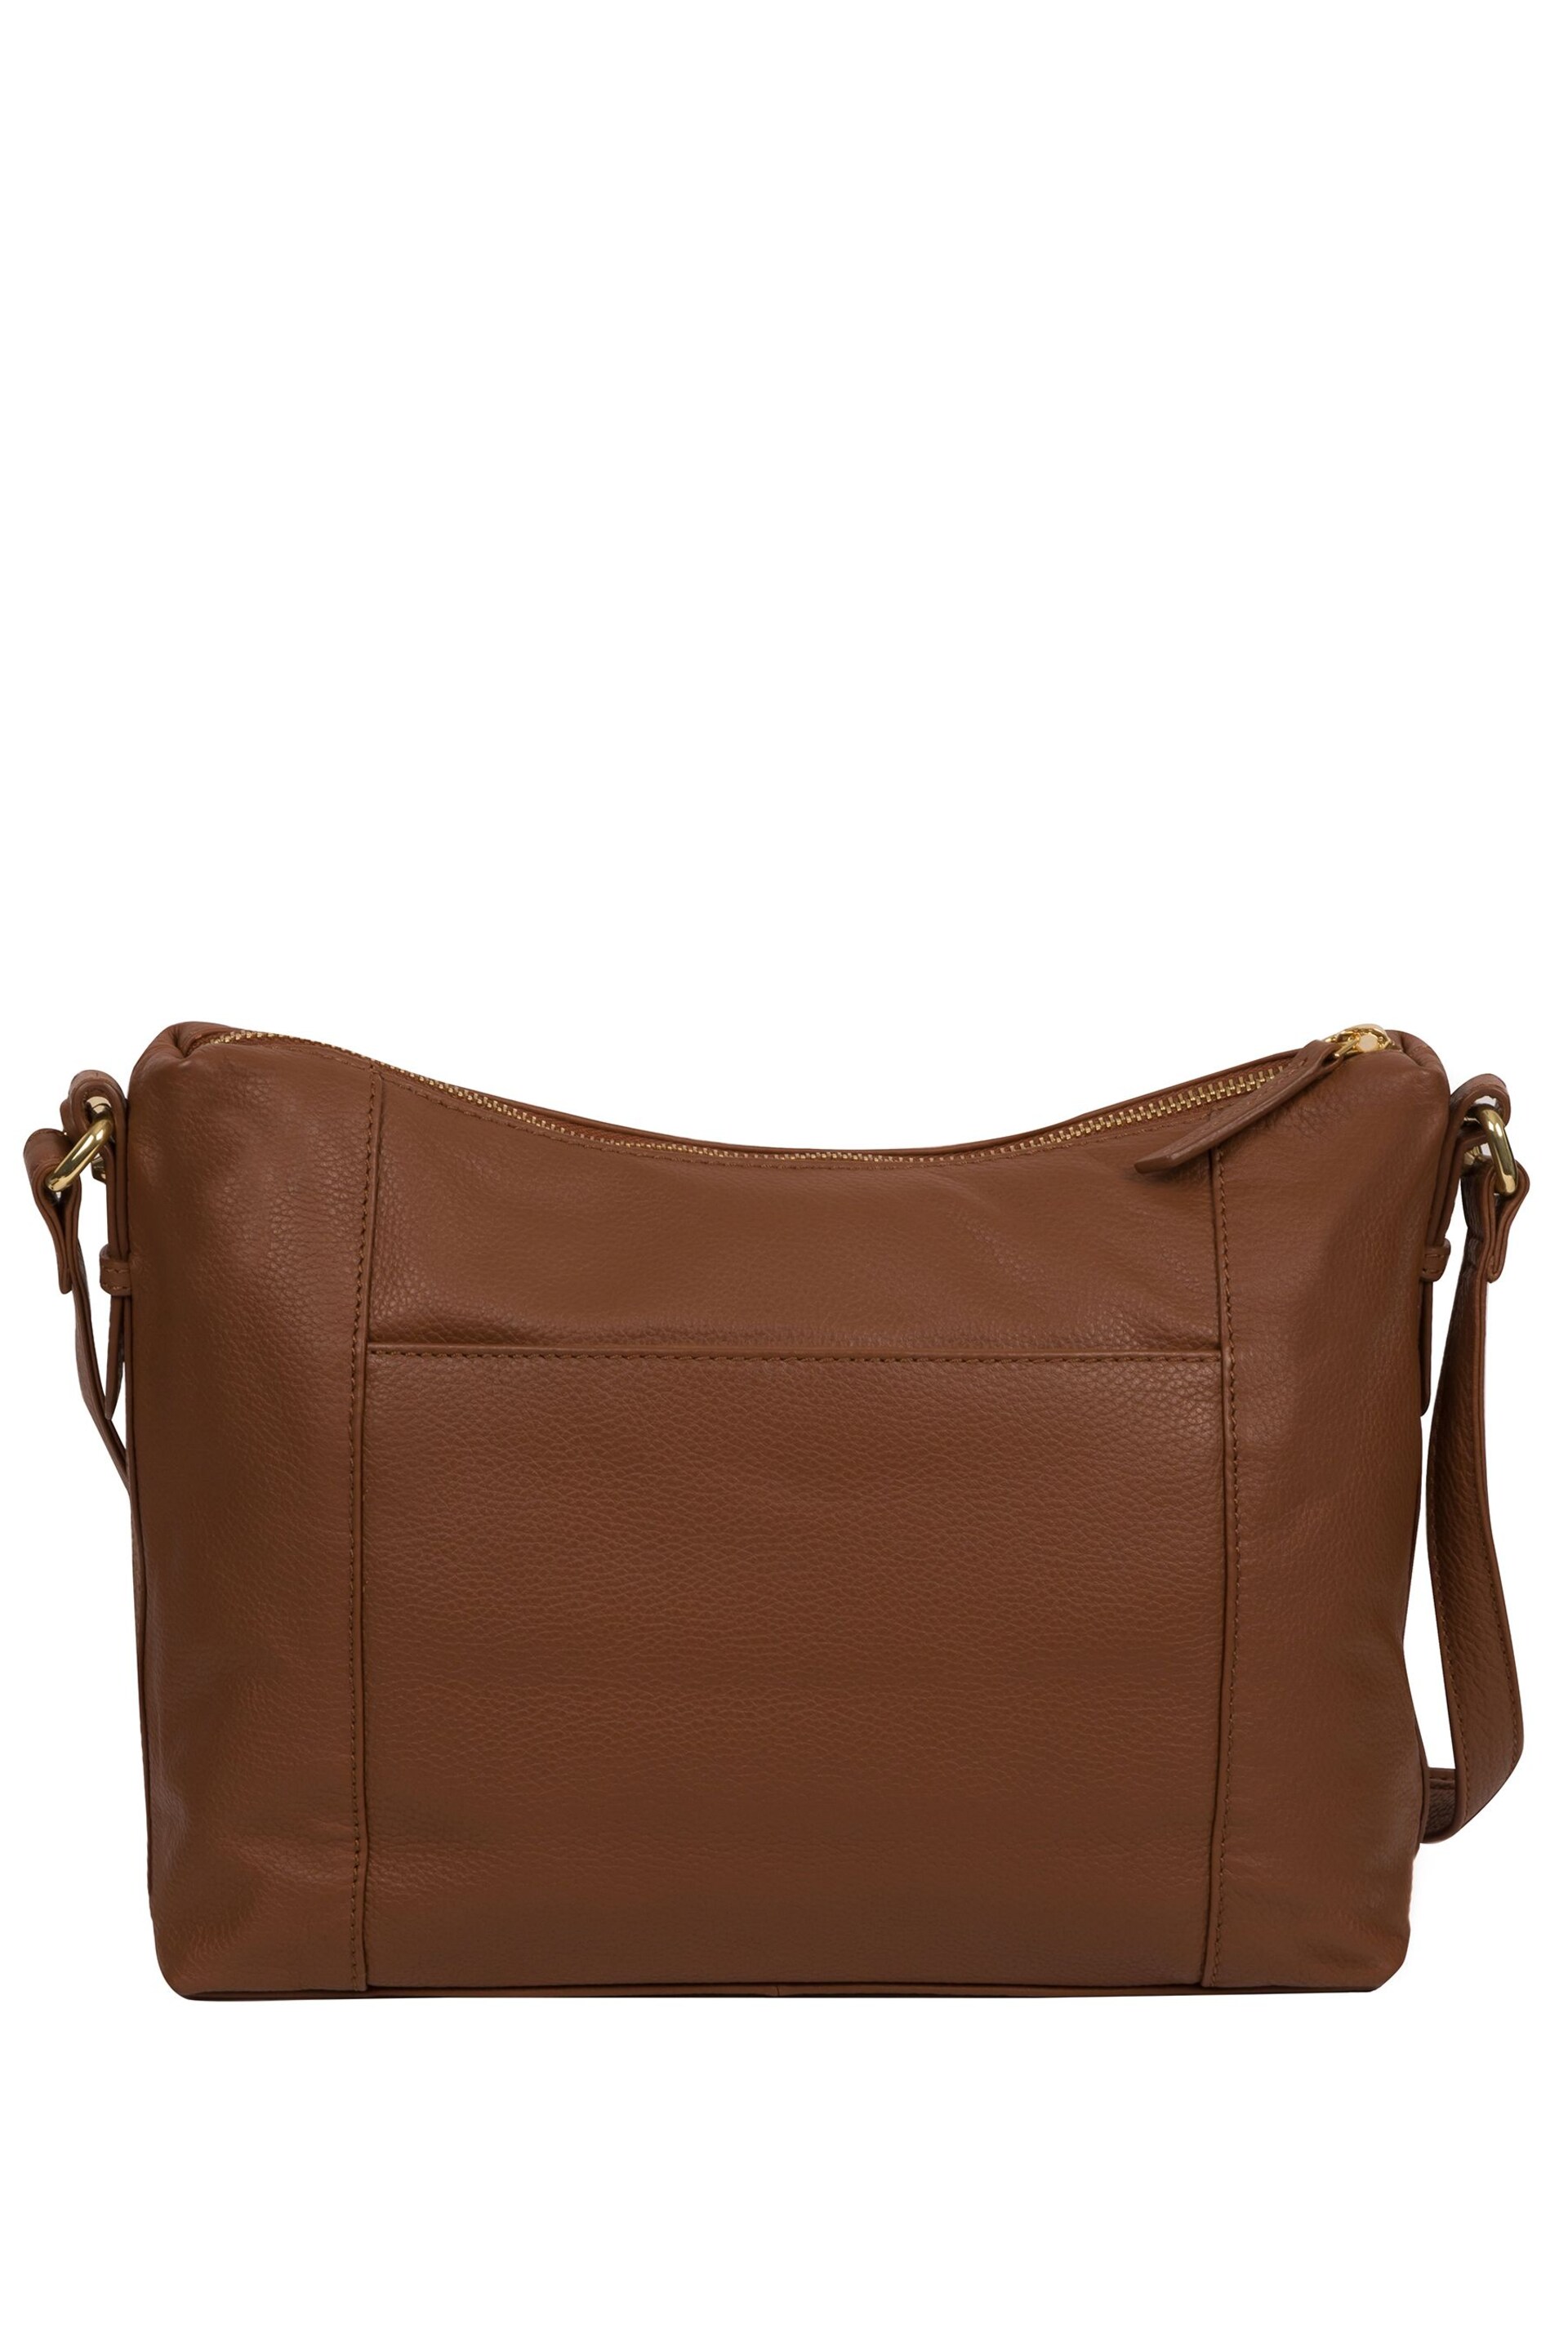 Pure Luxuries London Jenna Leather Shoulder Bag - Image 2 of 6